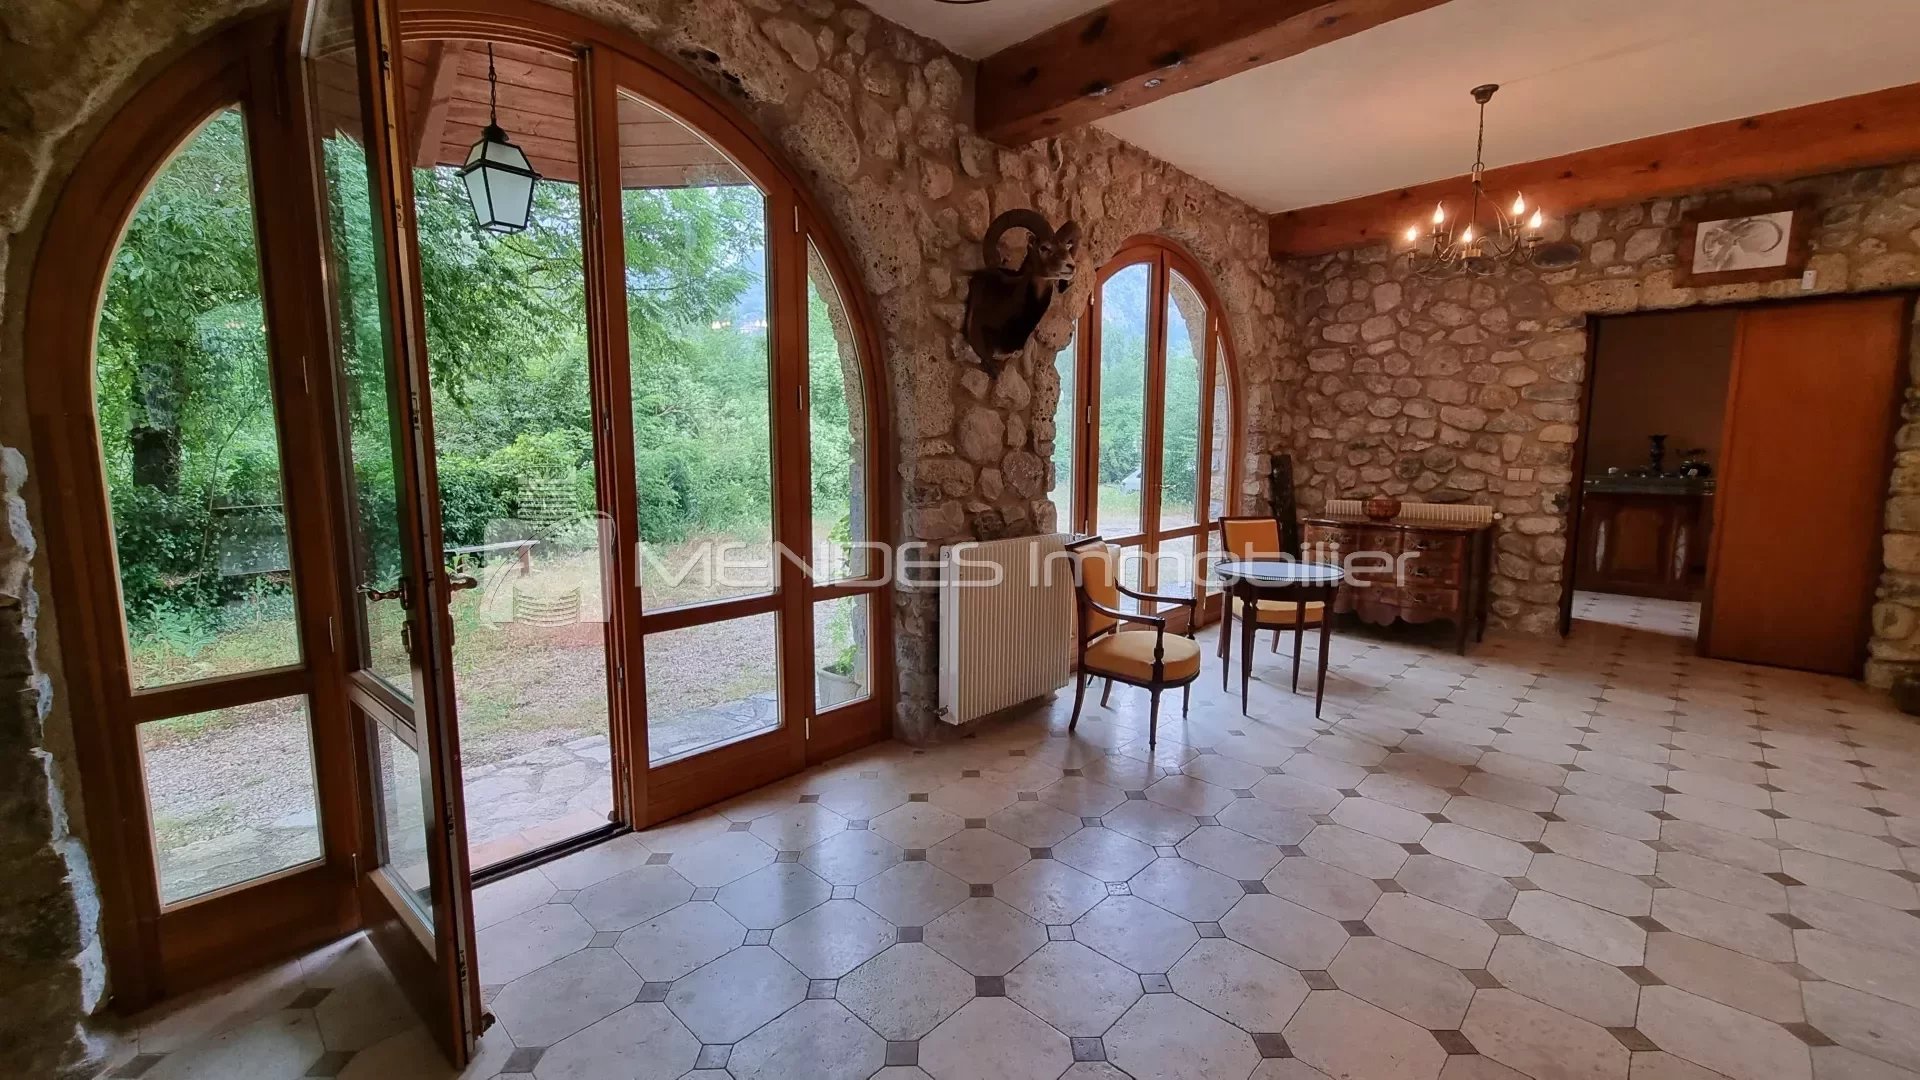 PROPERTY WITH VILLA MADE OS STONES IDEAL FOR HORSES IN SOSPEL